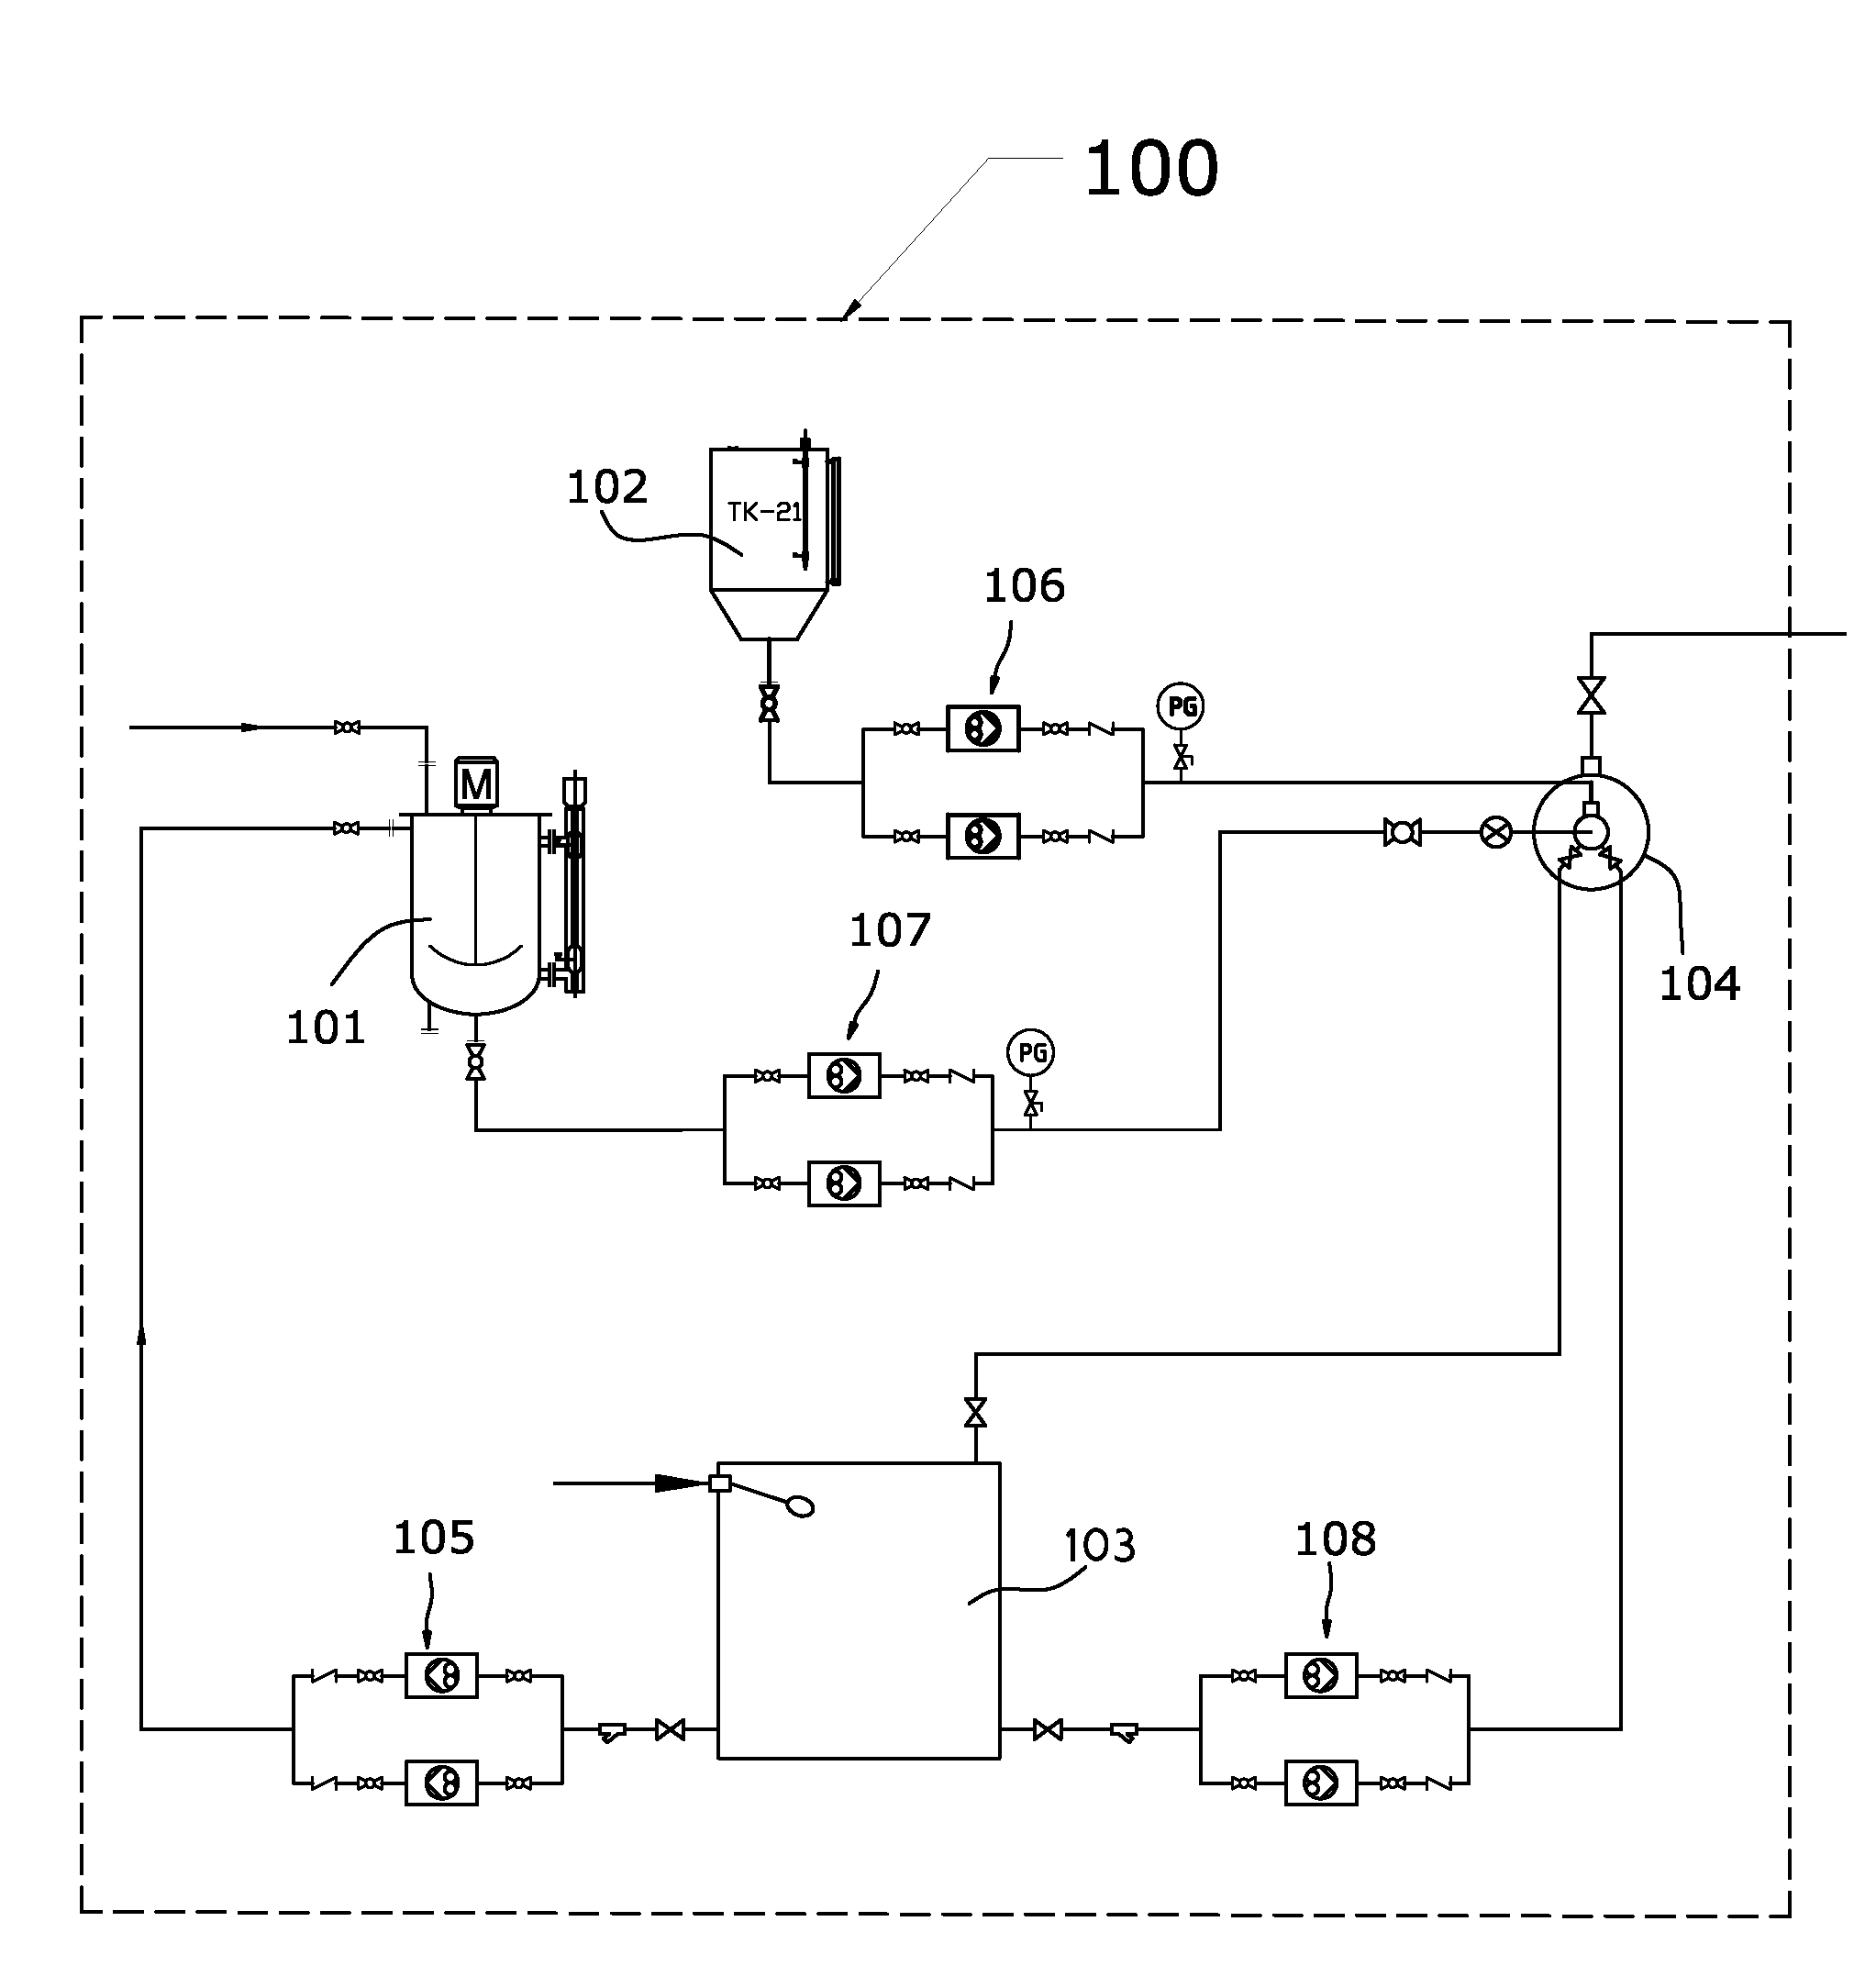 Glycerol (Medical Grade) Preparation Method using a By-Product of a Bio-Diesel Process